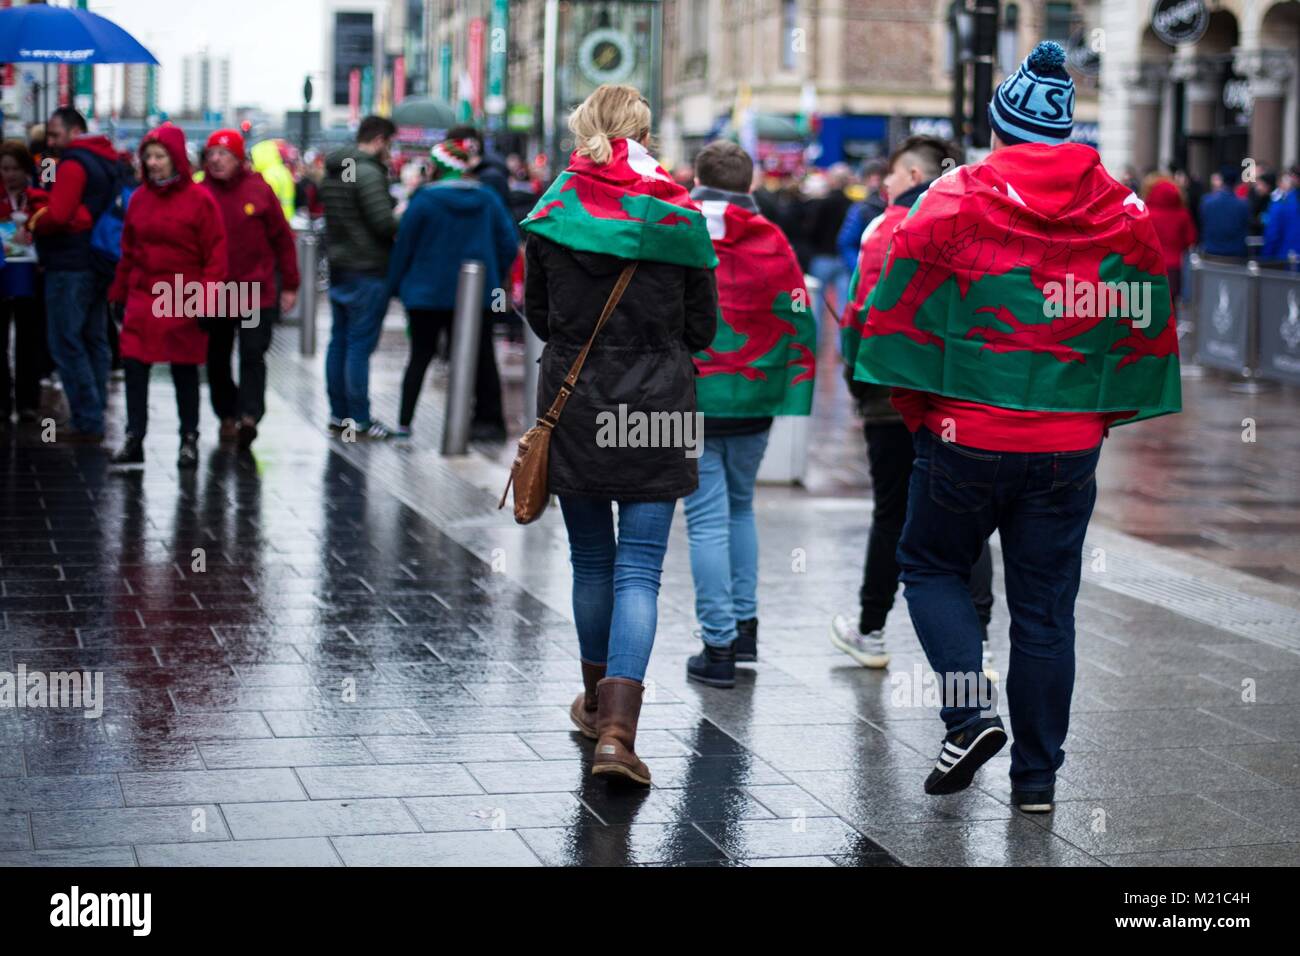 UNITED KINGDOM, WALES. 03 February 2018. Welsh fans make their way to the Stadium in the rain. Credit: Lorna Cabble/Alamy Live News Stock Photo